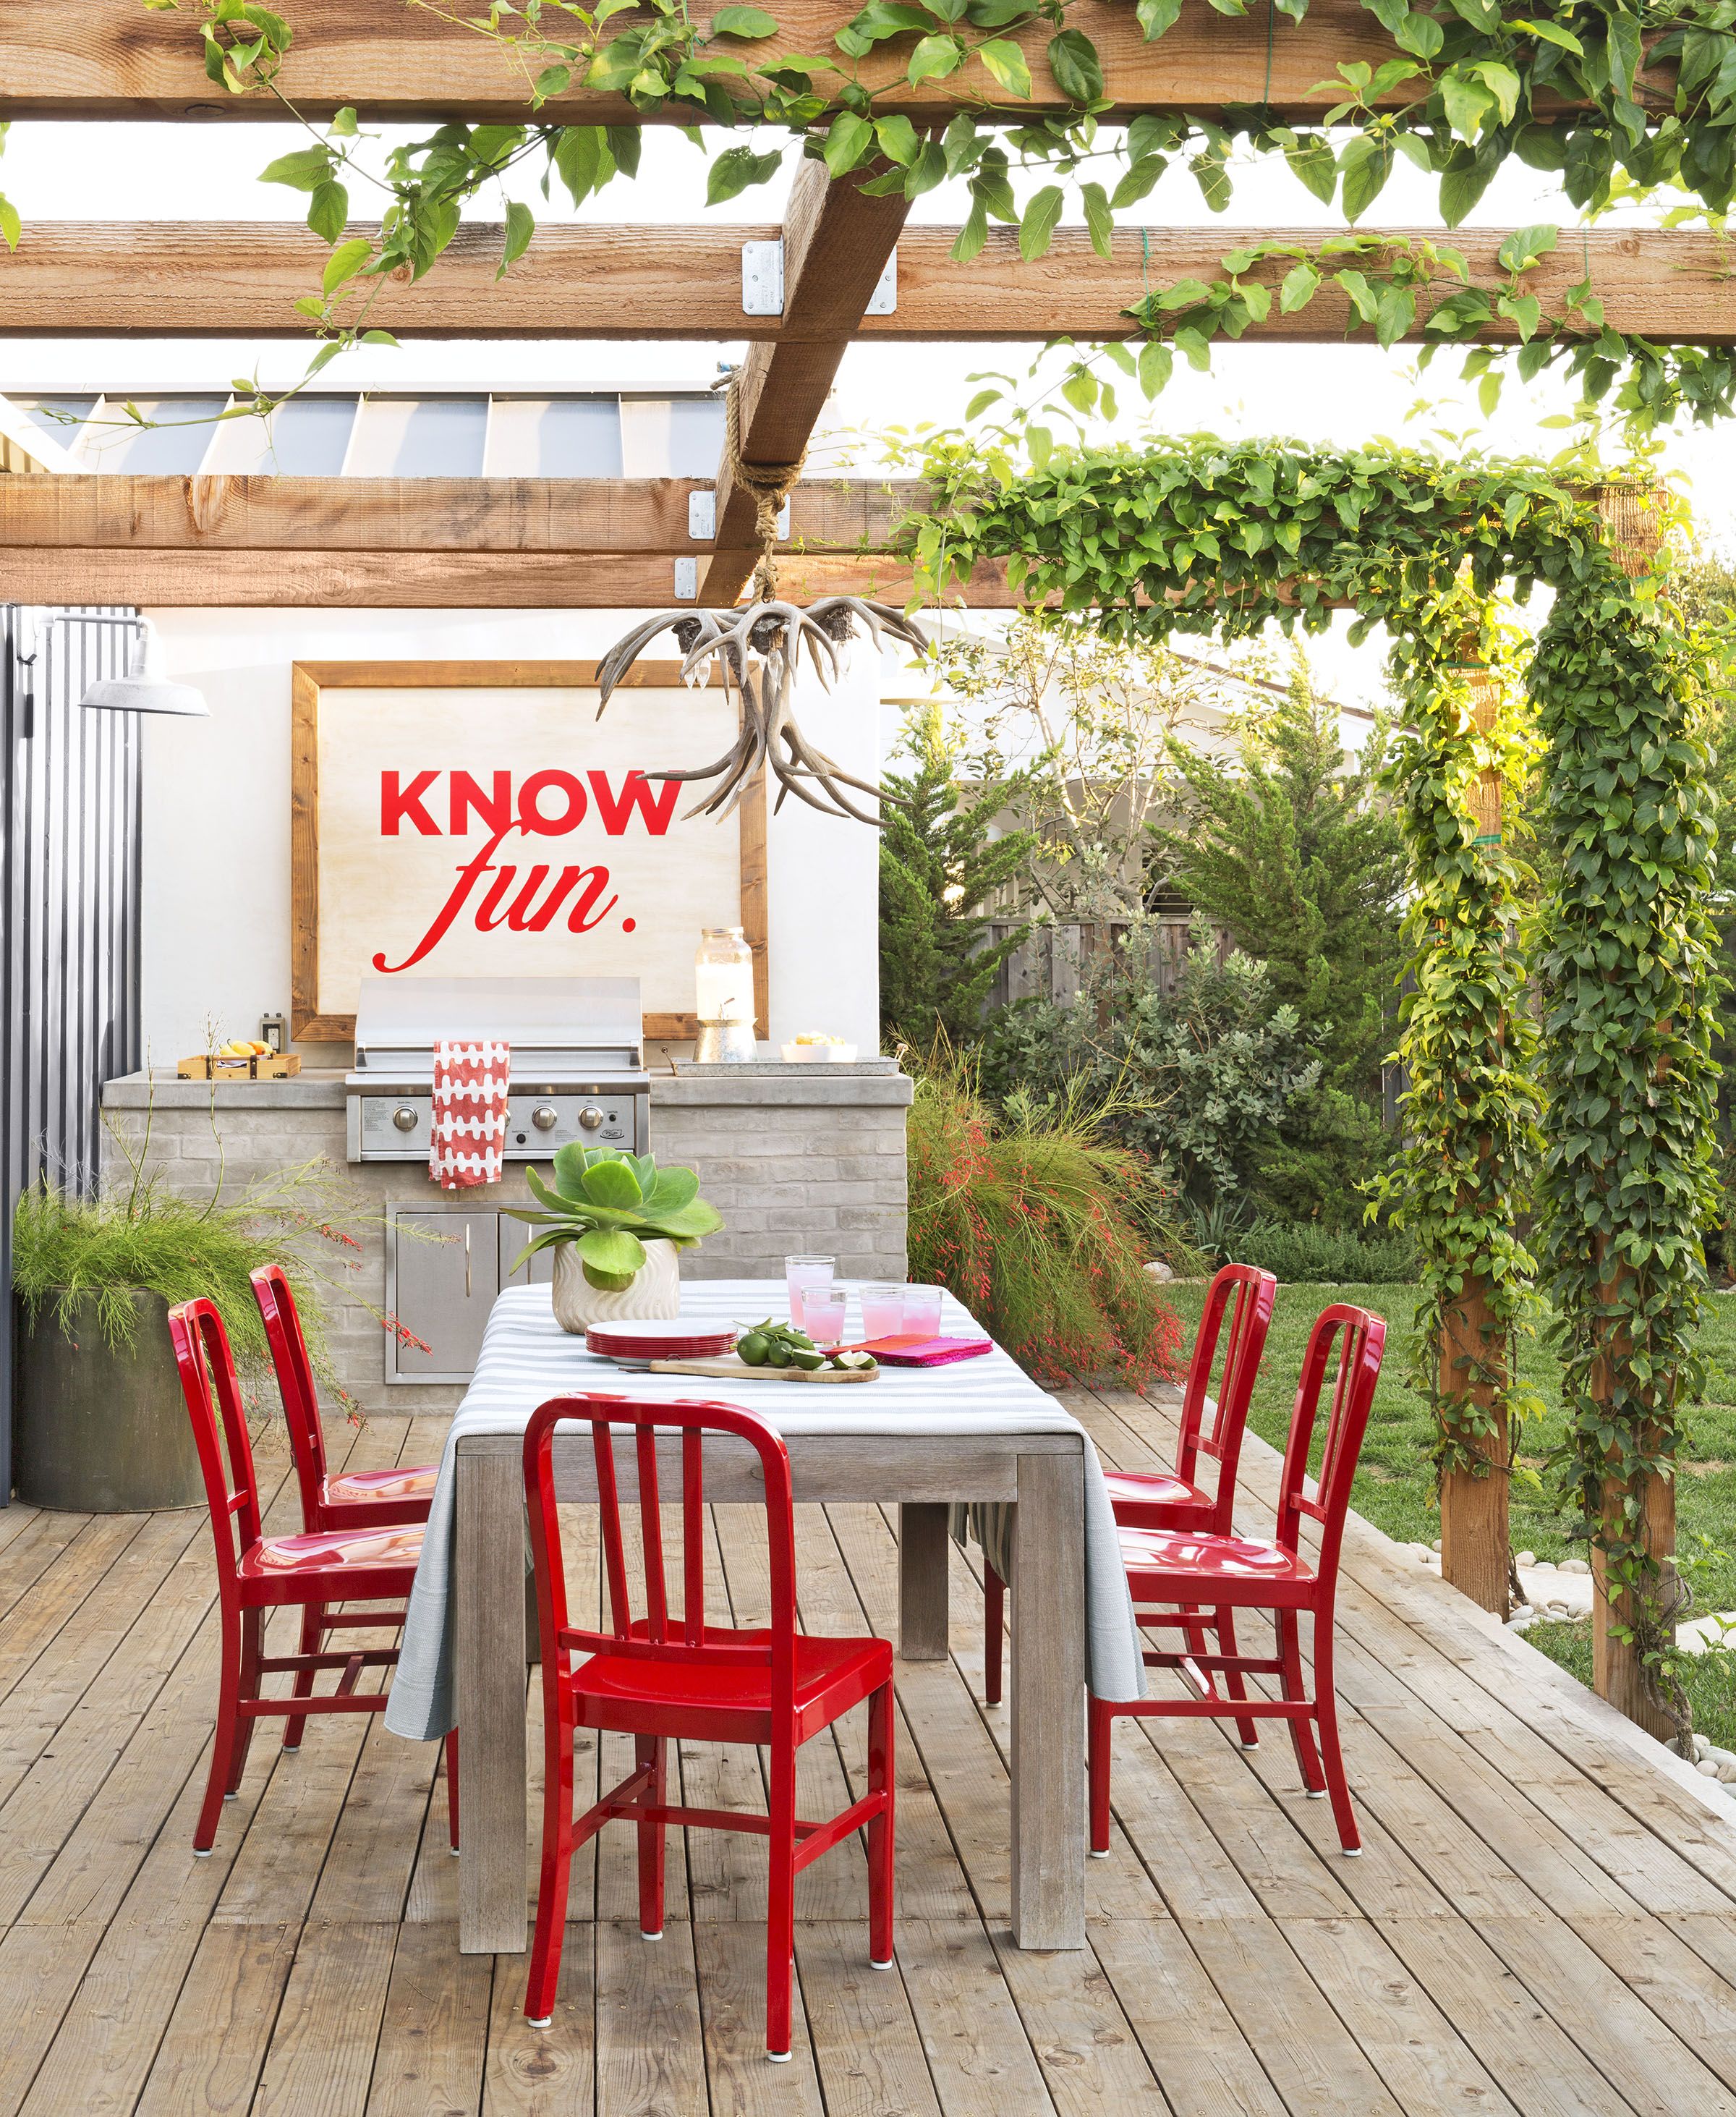 Fun and functional outdoor kitchens